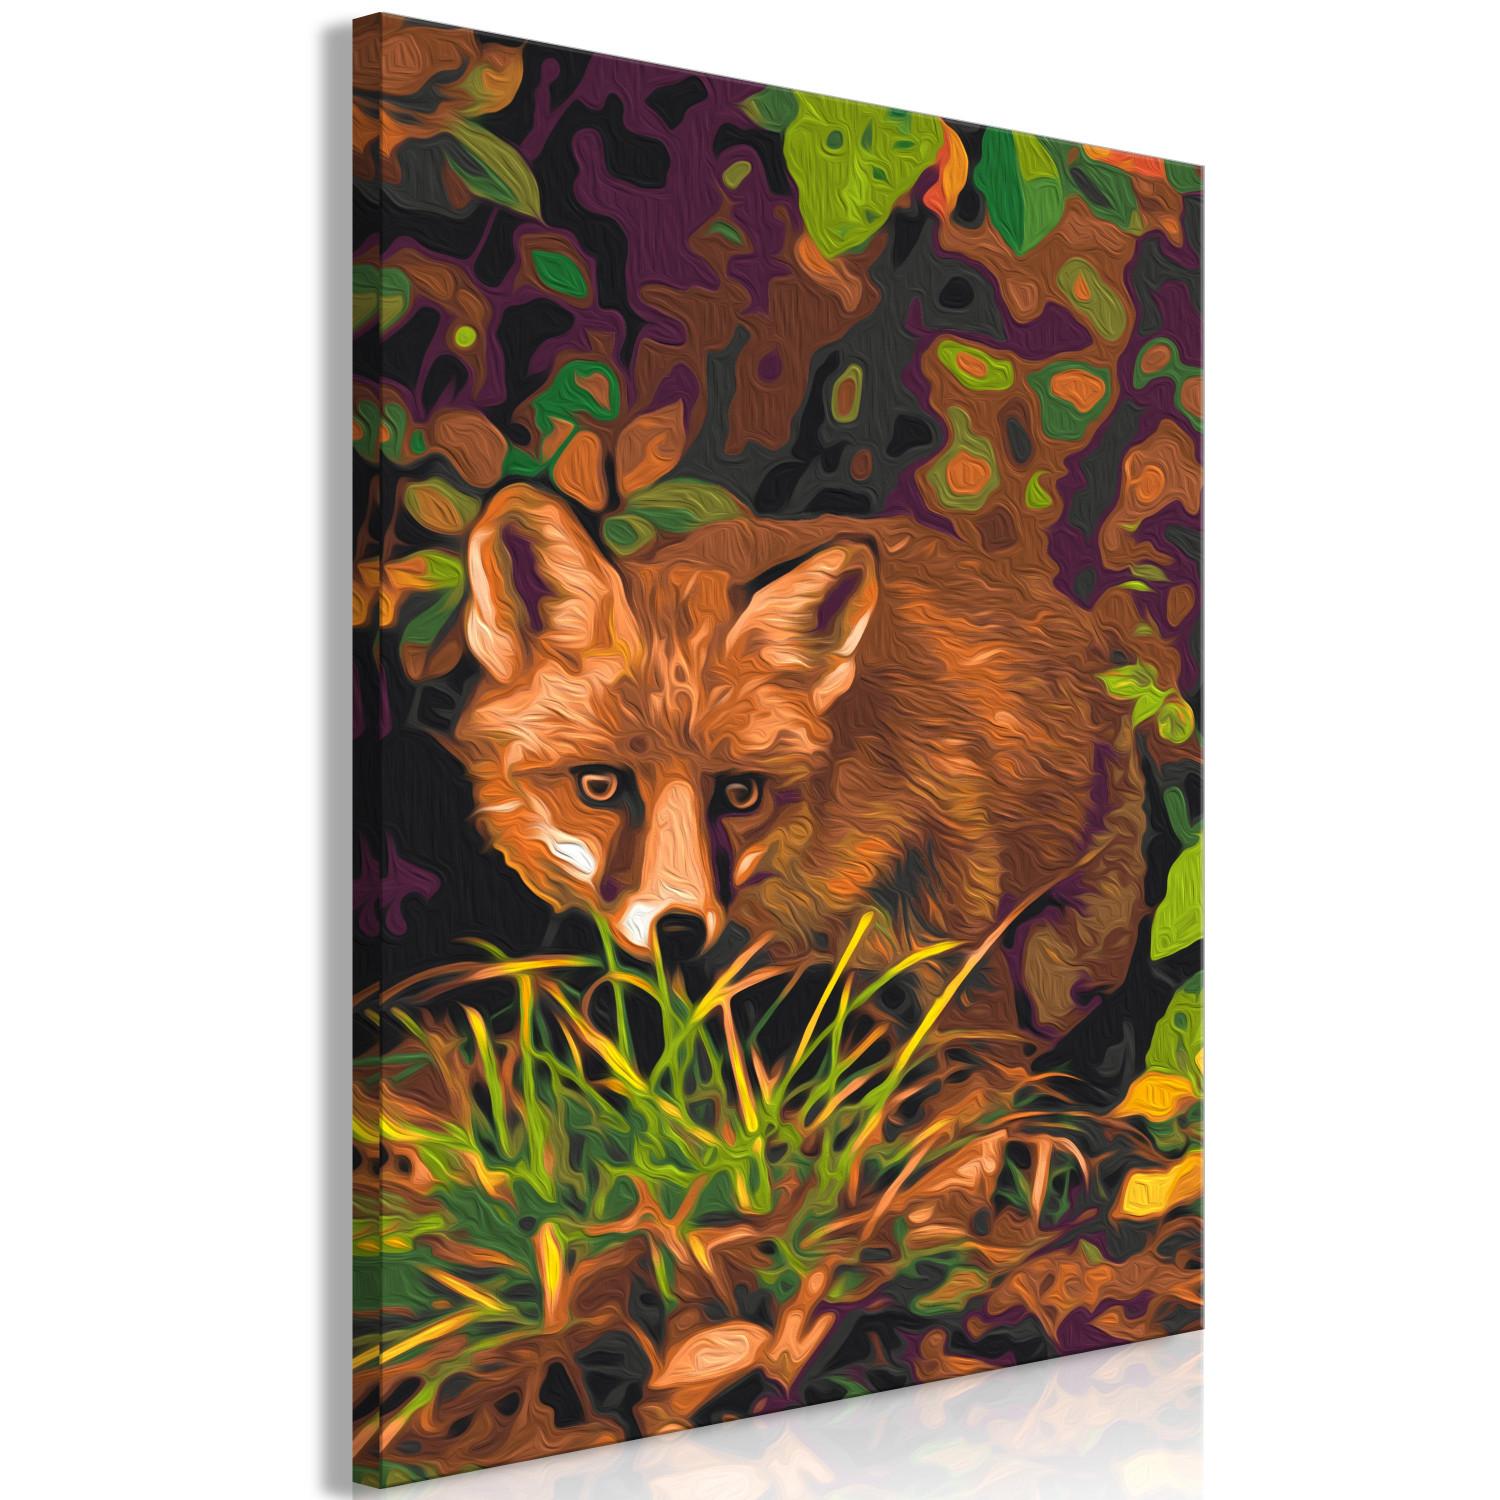 Cuadro para pintar con números Crouching Fox - Wild Animal against the Background of Grasses and Autumn Leaves